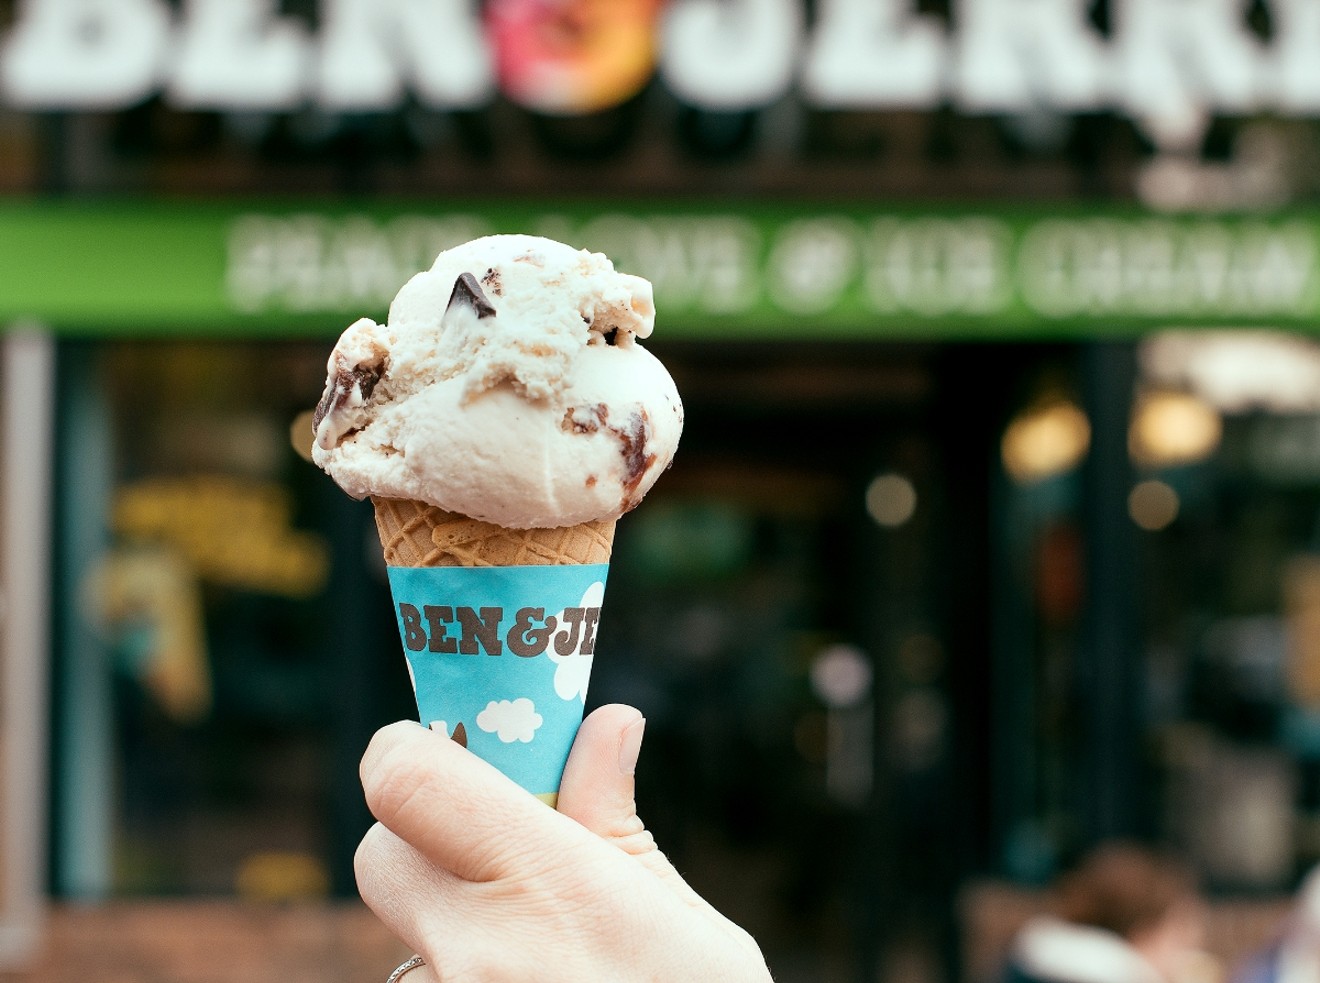 Free cones at Ben & Jerry's today.